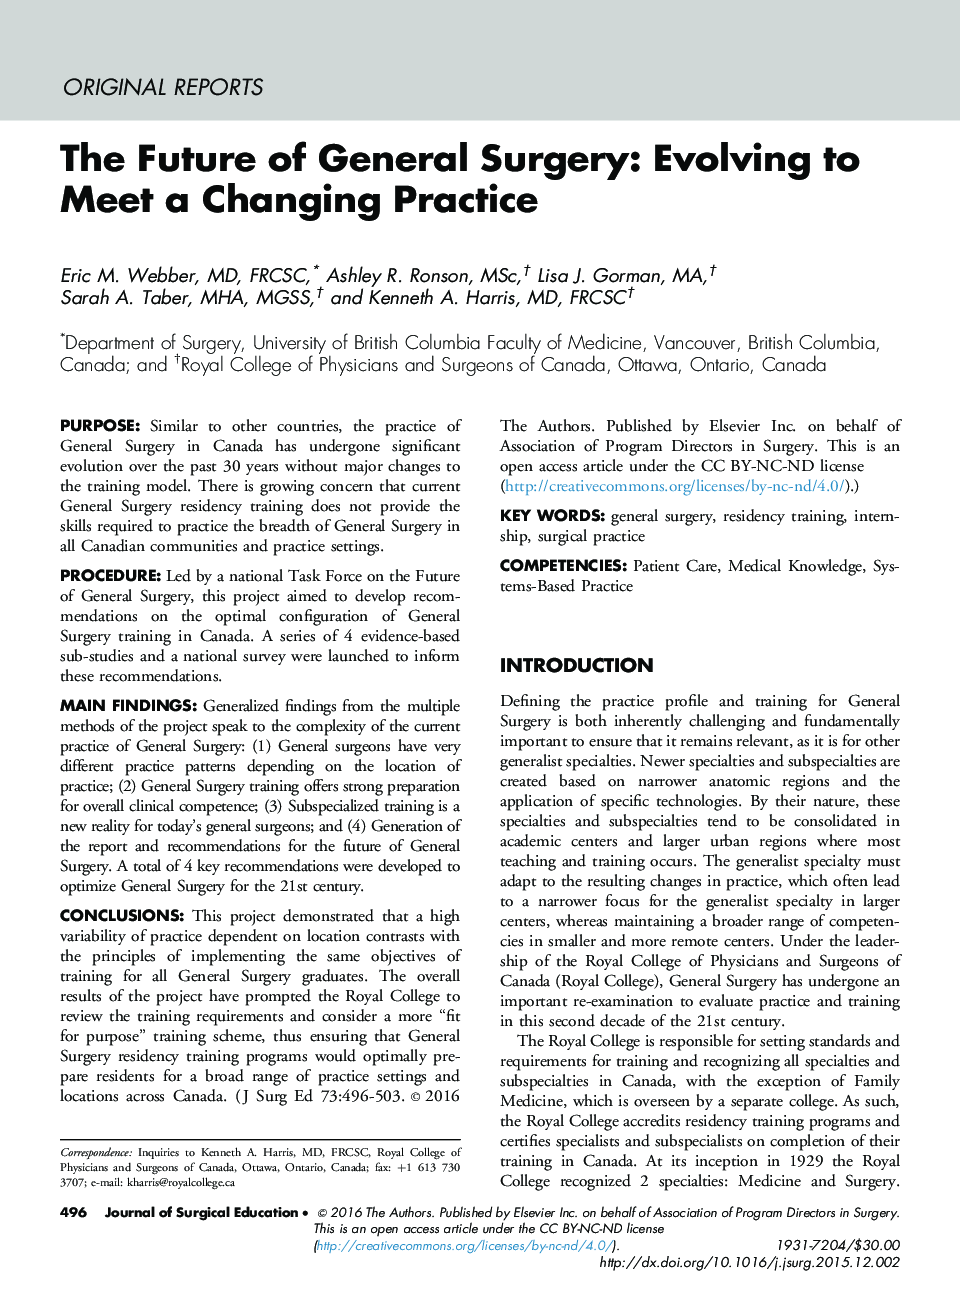 The Future of General Surgery: Evolving to Meet a Changing Practice